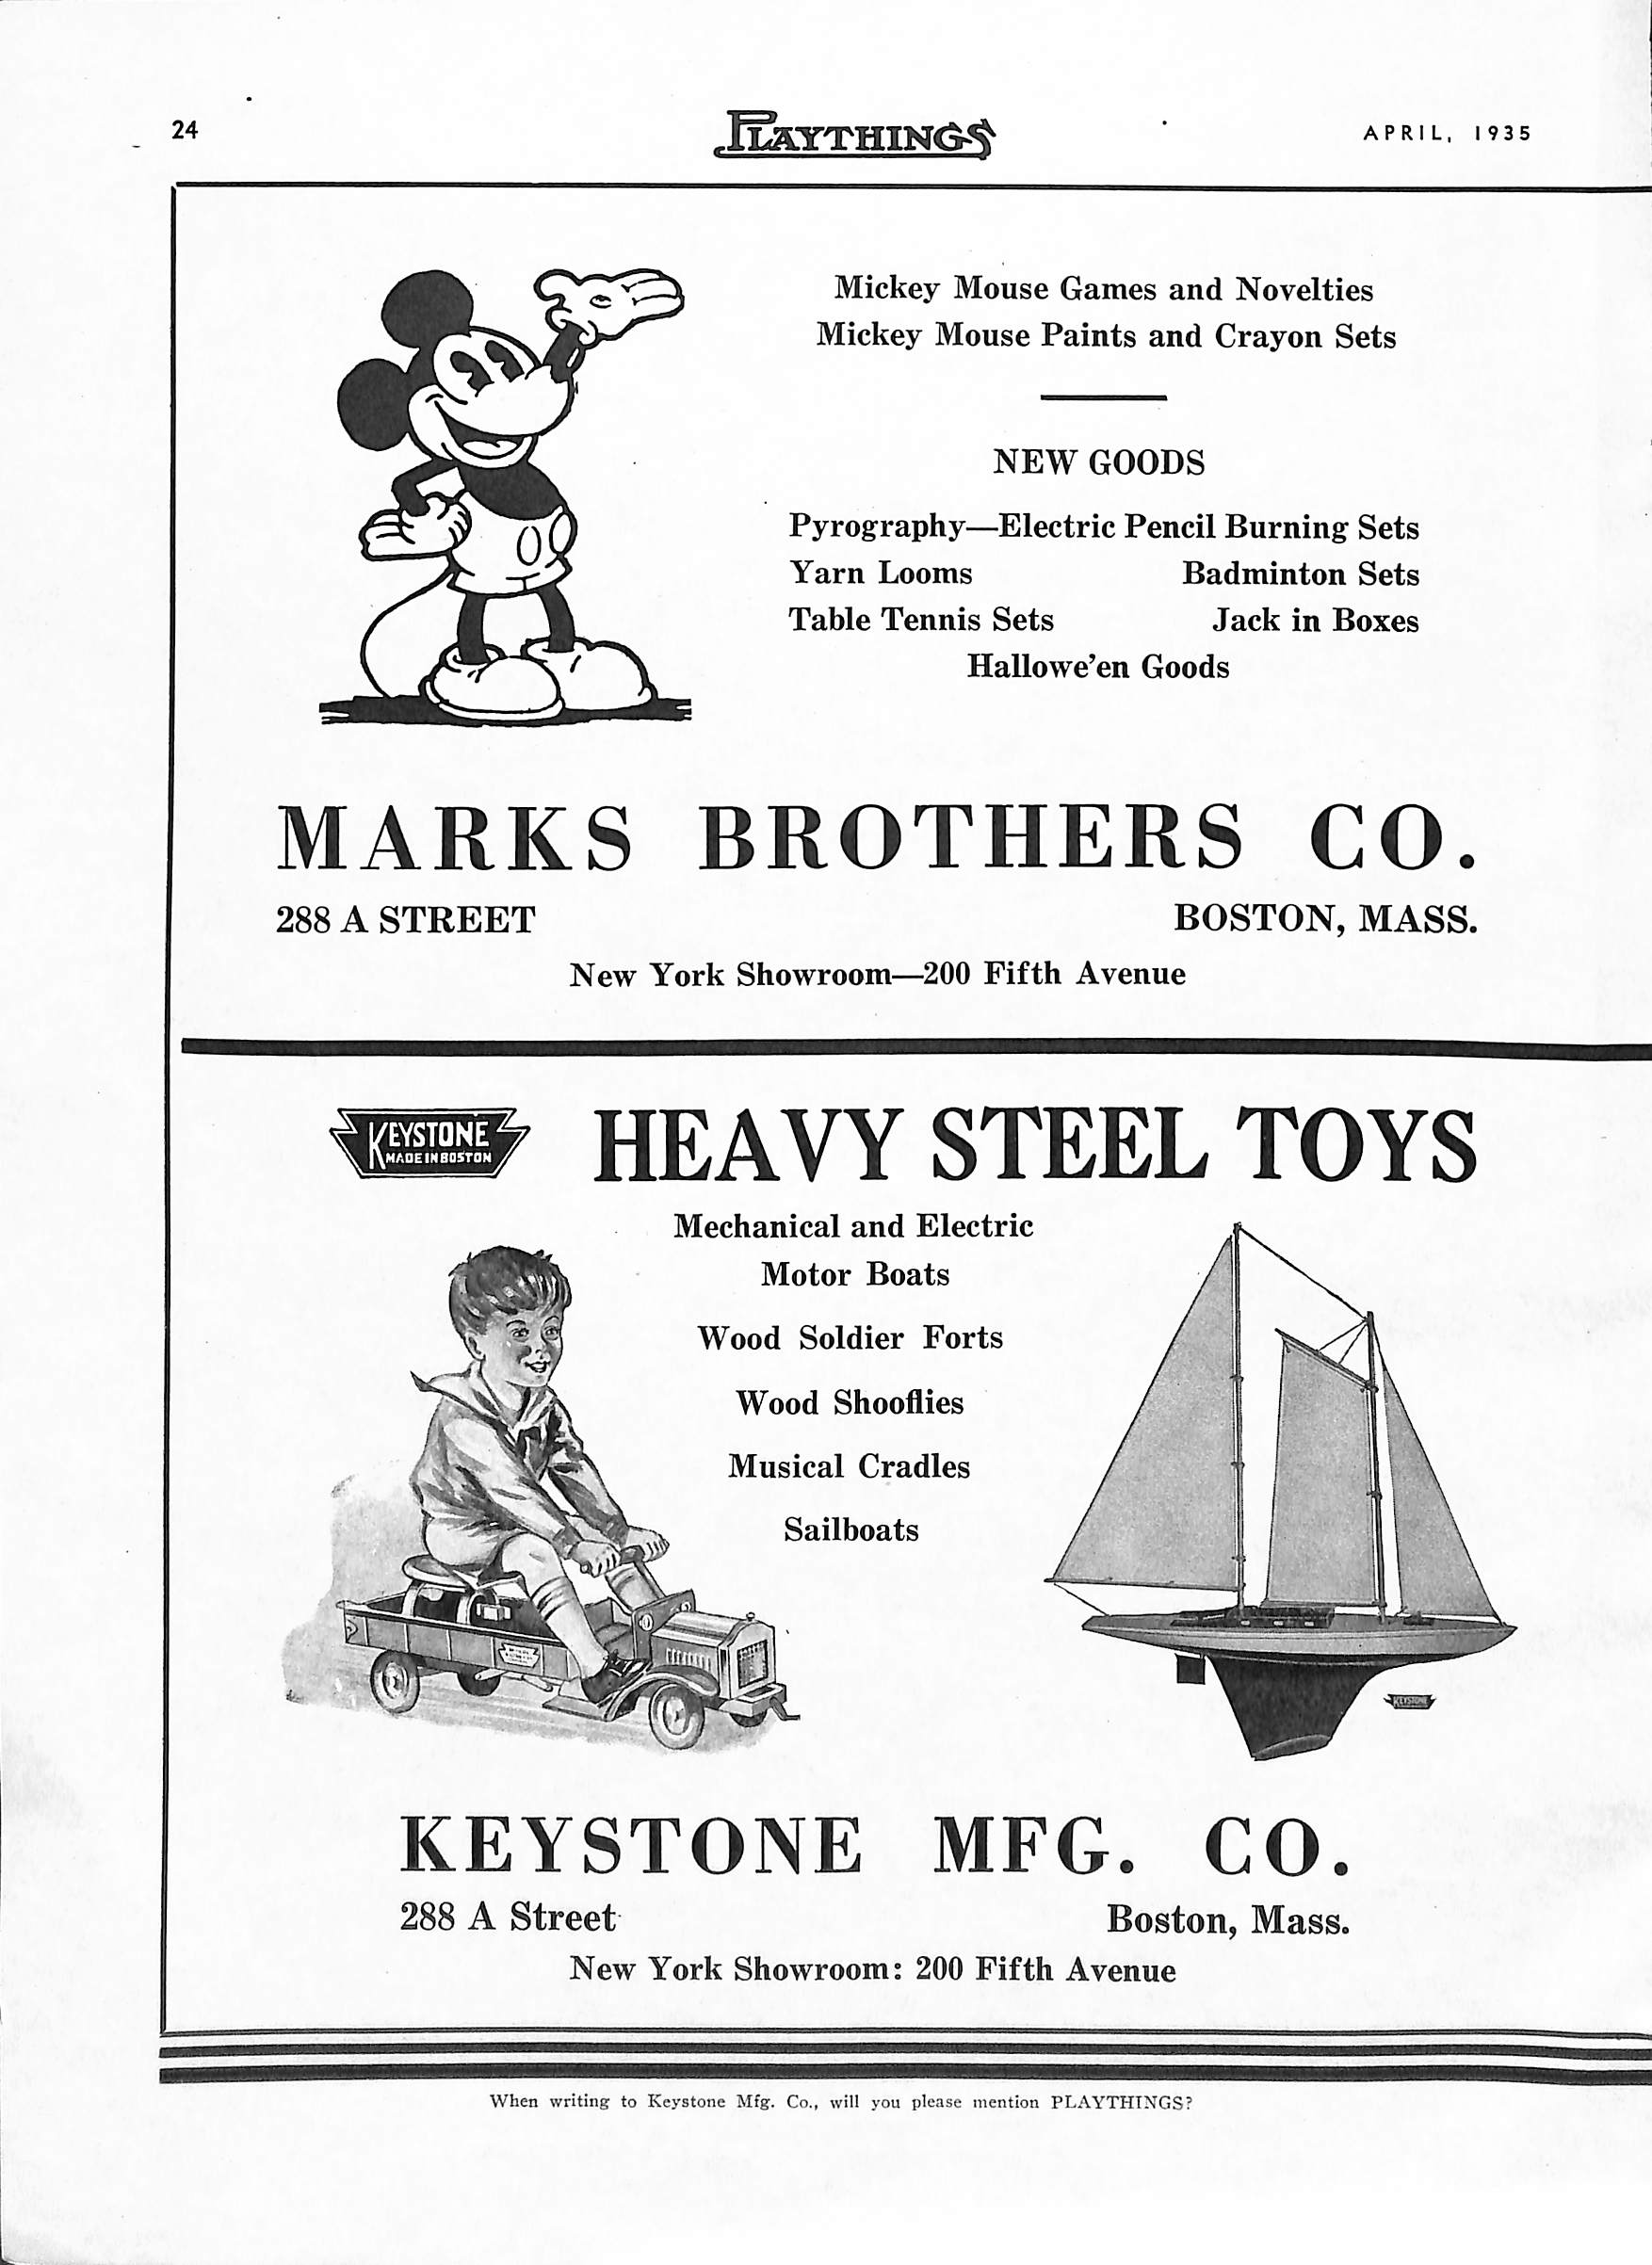 Playthings April 1935 Ad